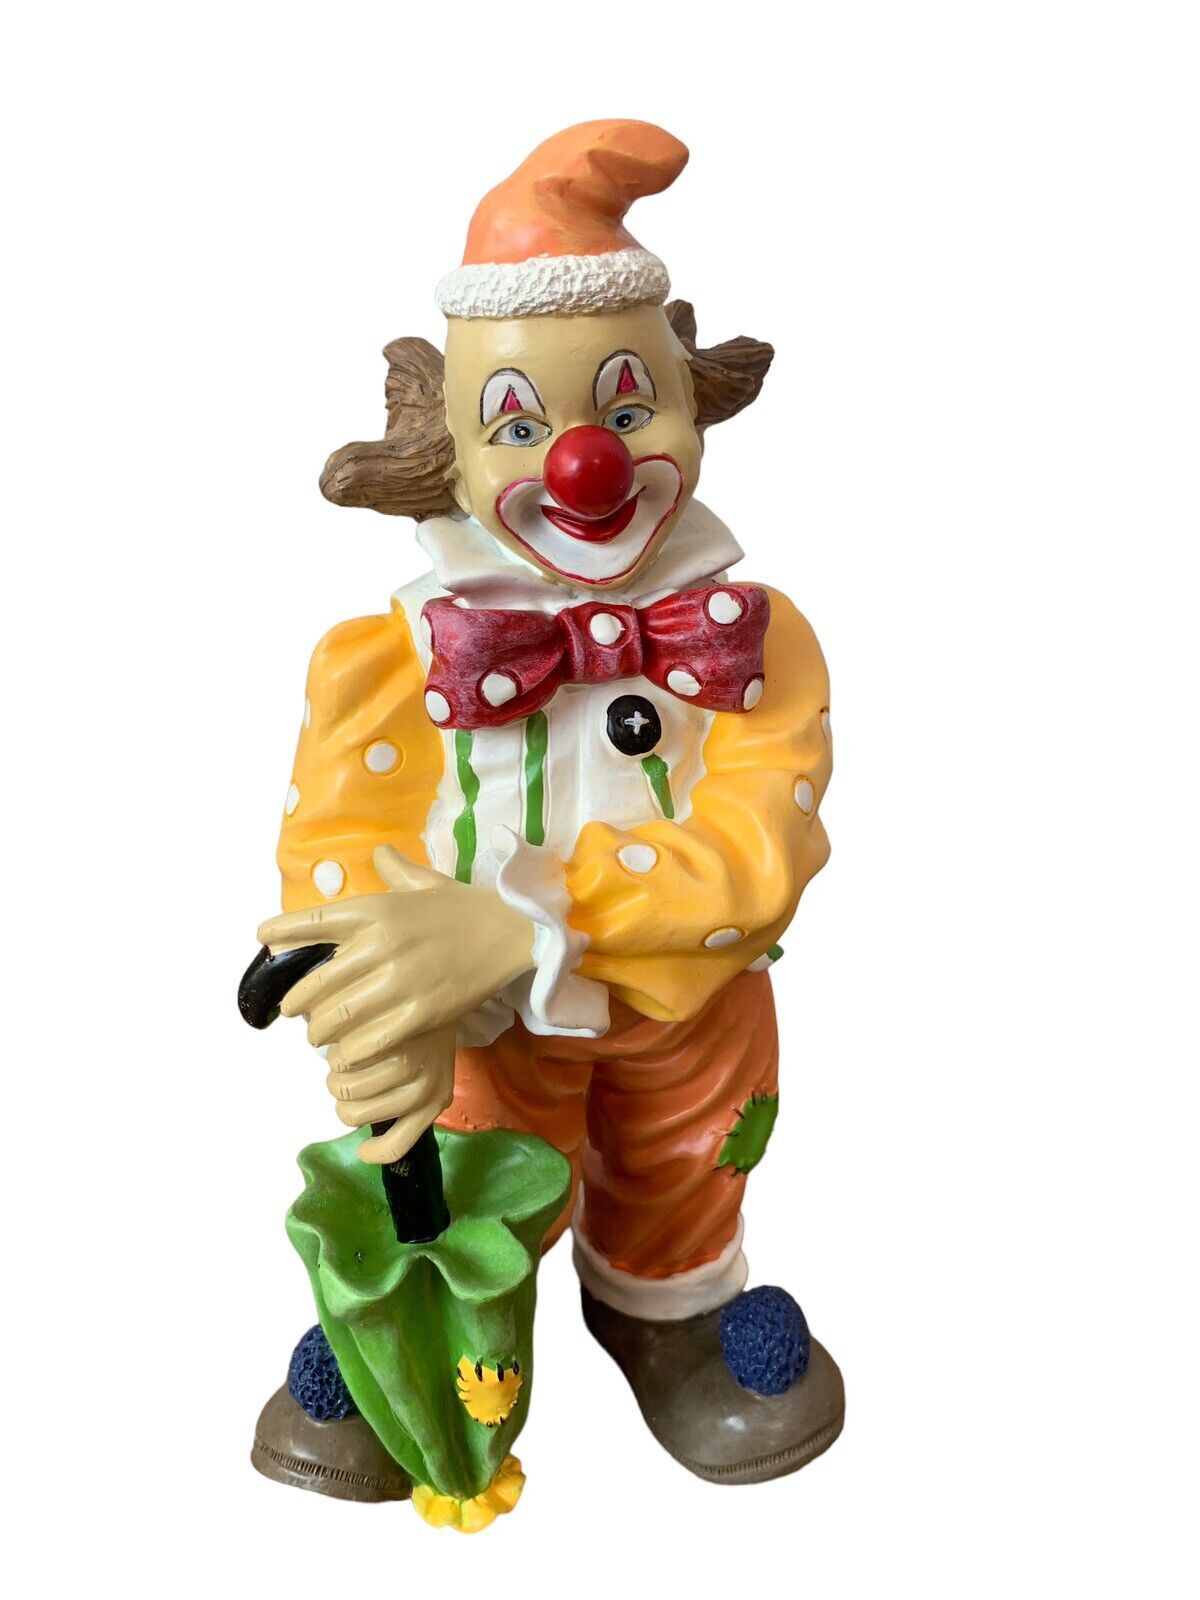 NEW Peter Olsen Circus Clown With Umbrella Vintage #62 Of 500 Open Box